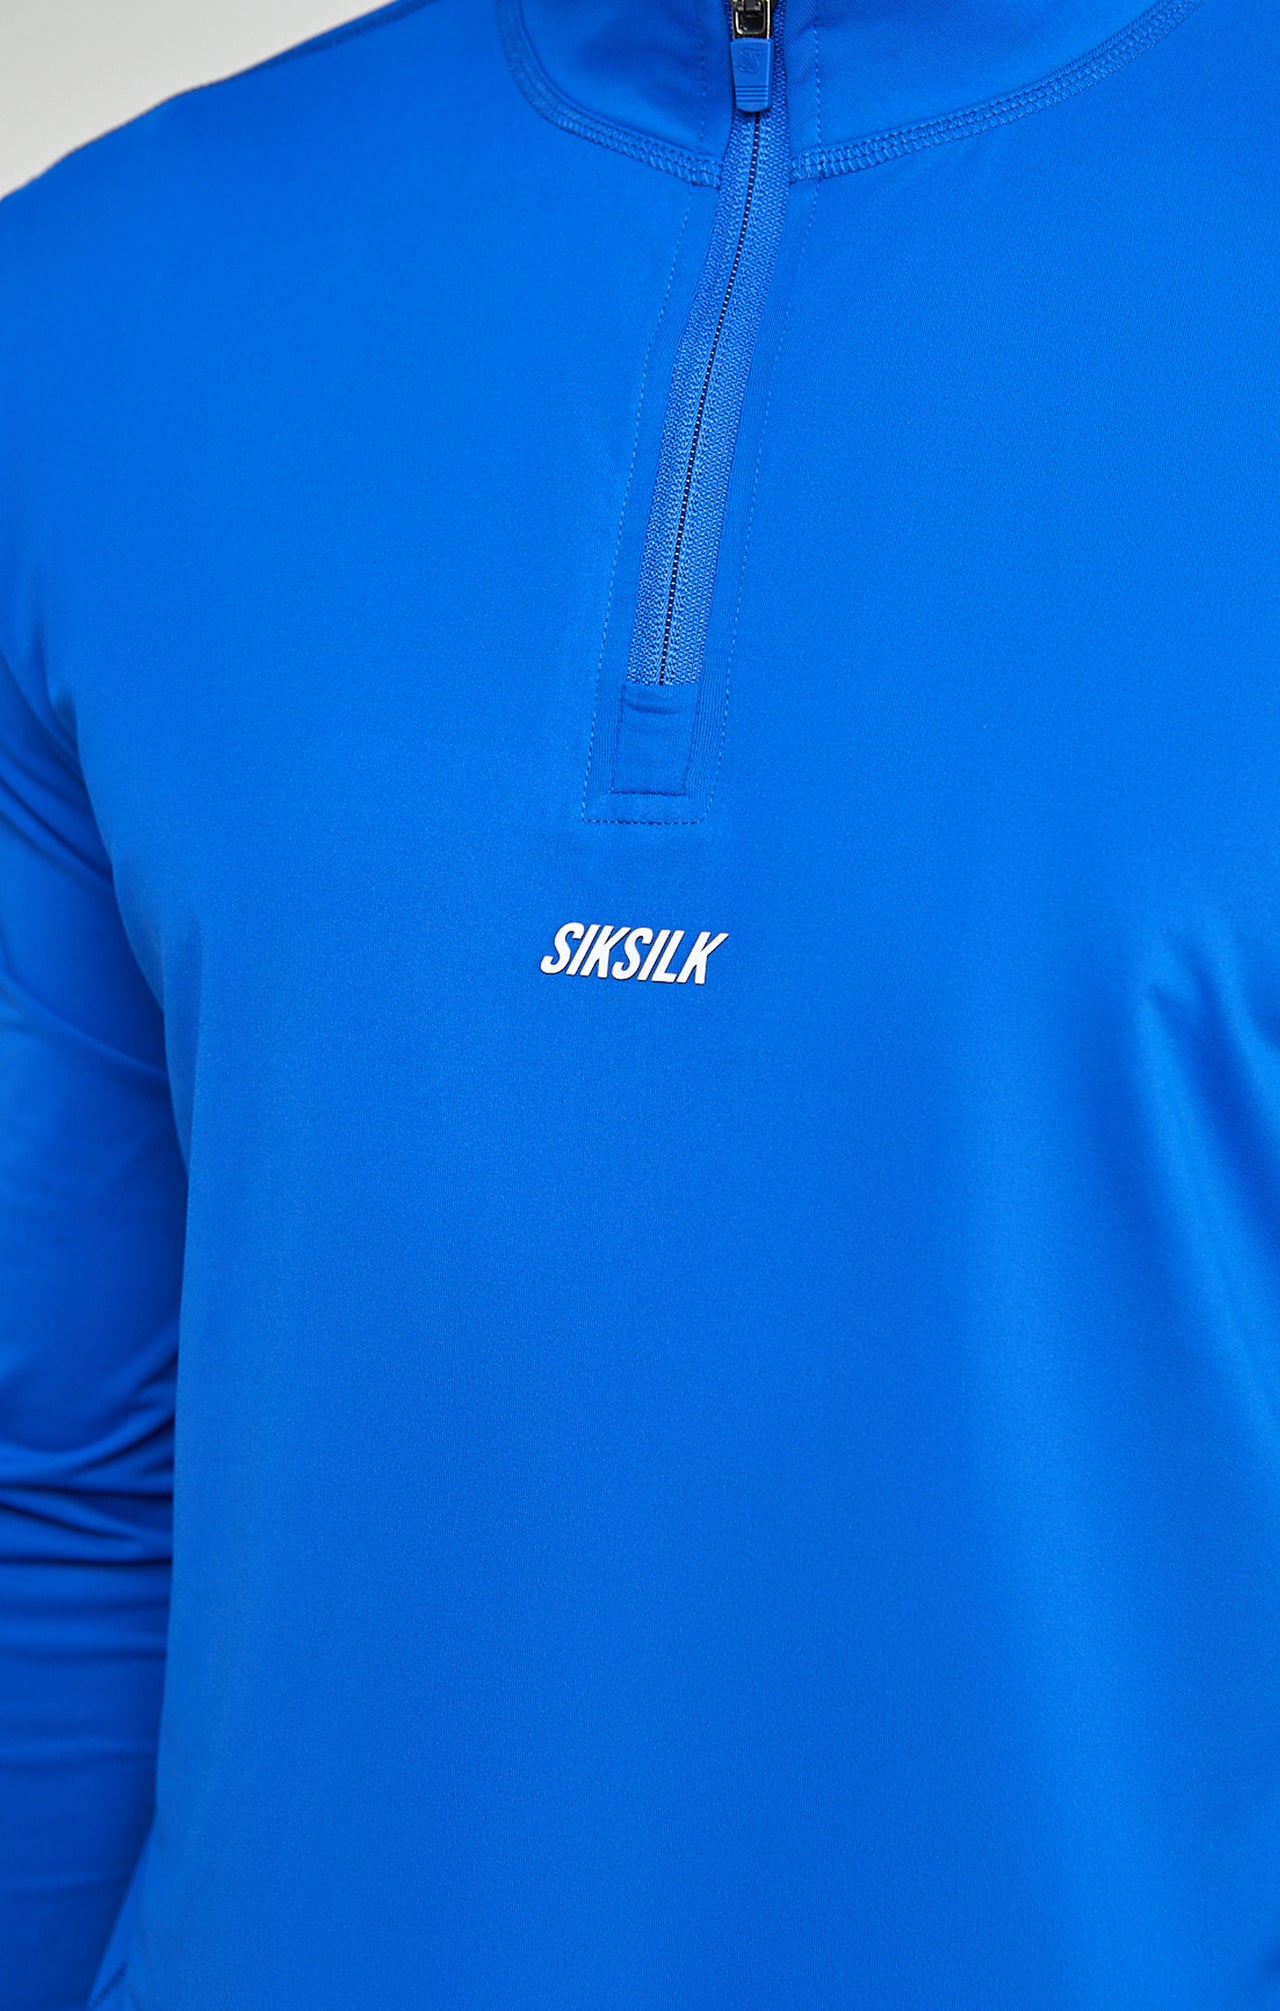 Blue Sports Muscle Fit Quarter Zip Long Sleeve Top (2)